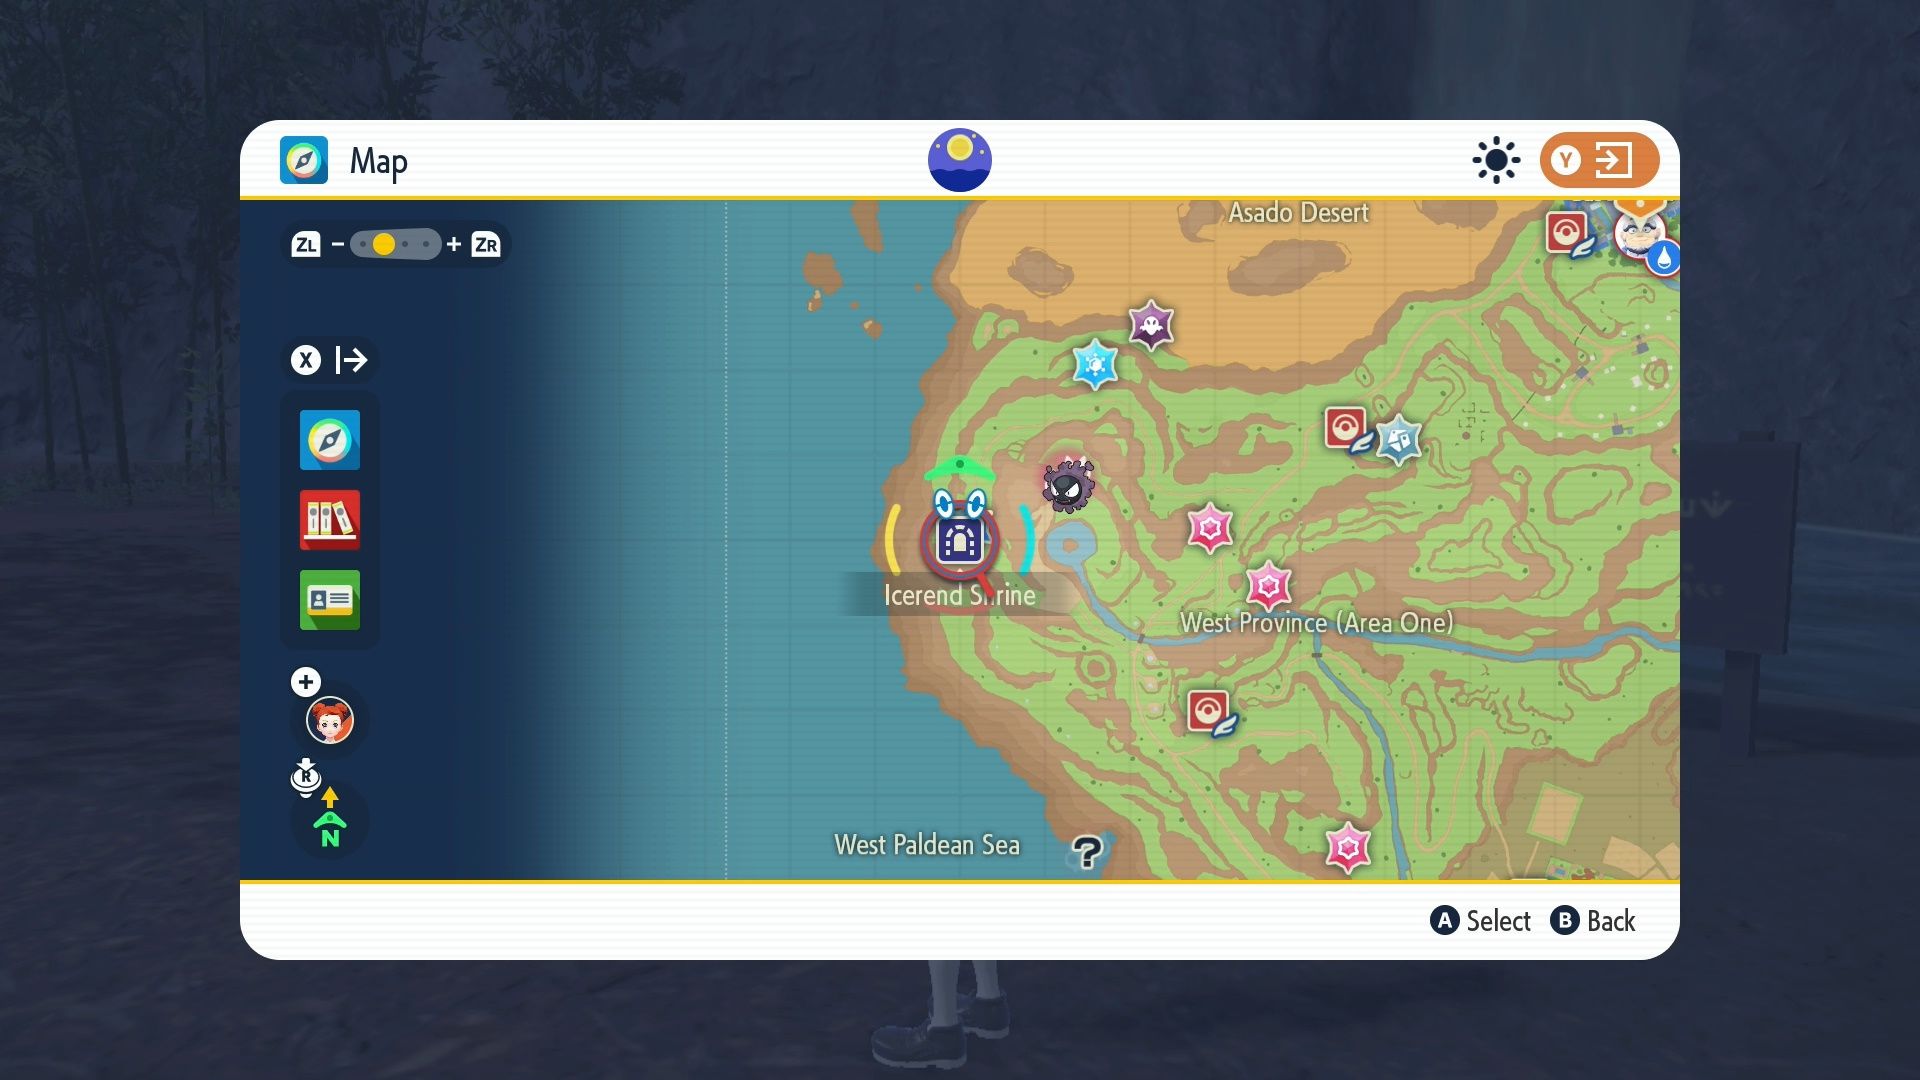 Map location of Icerend Shrine.